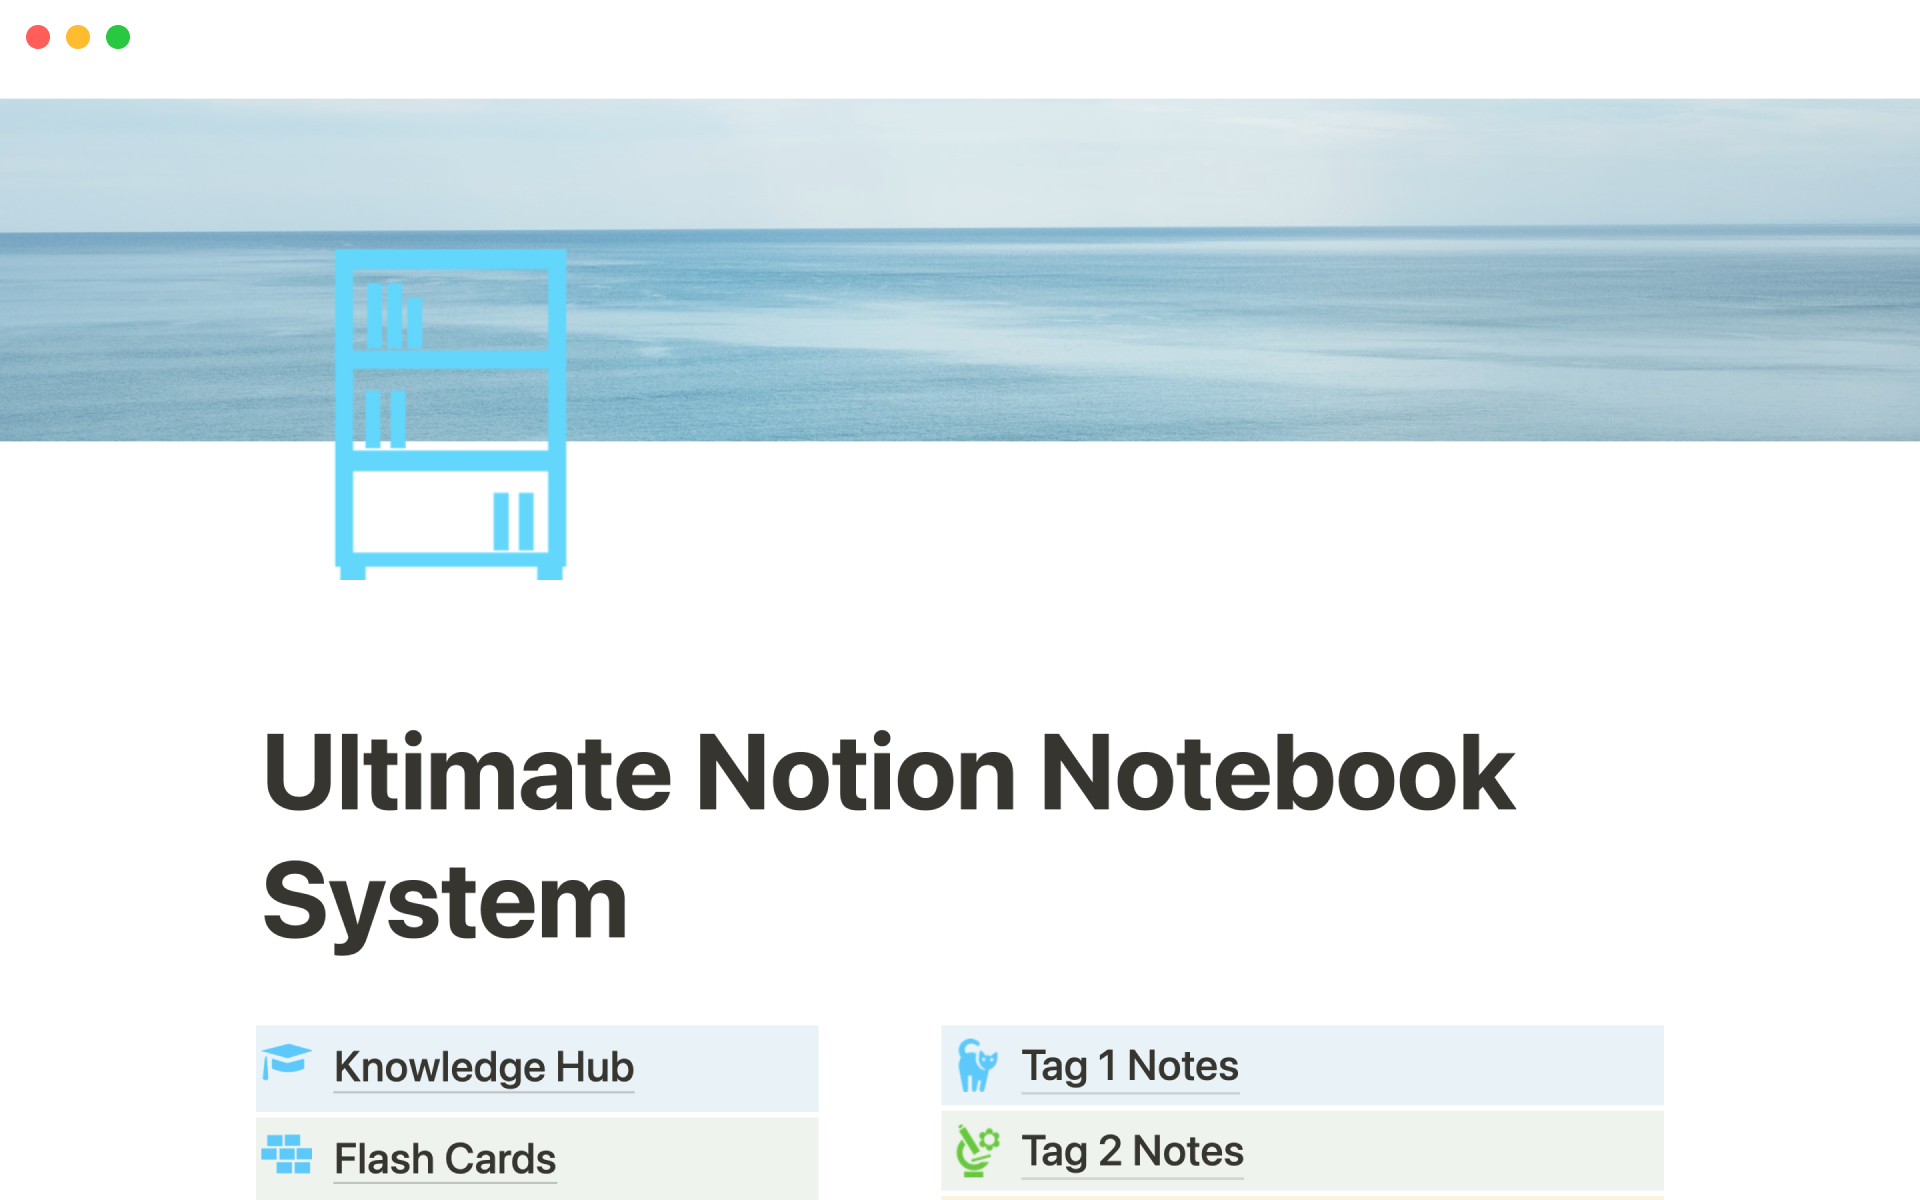 Organizes your notebooks by subject and create flashcards as you take notes.